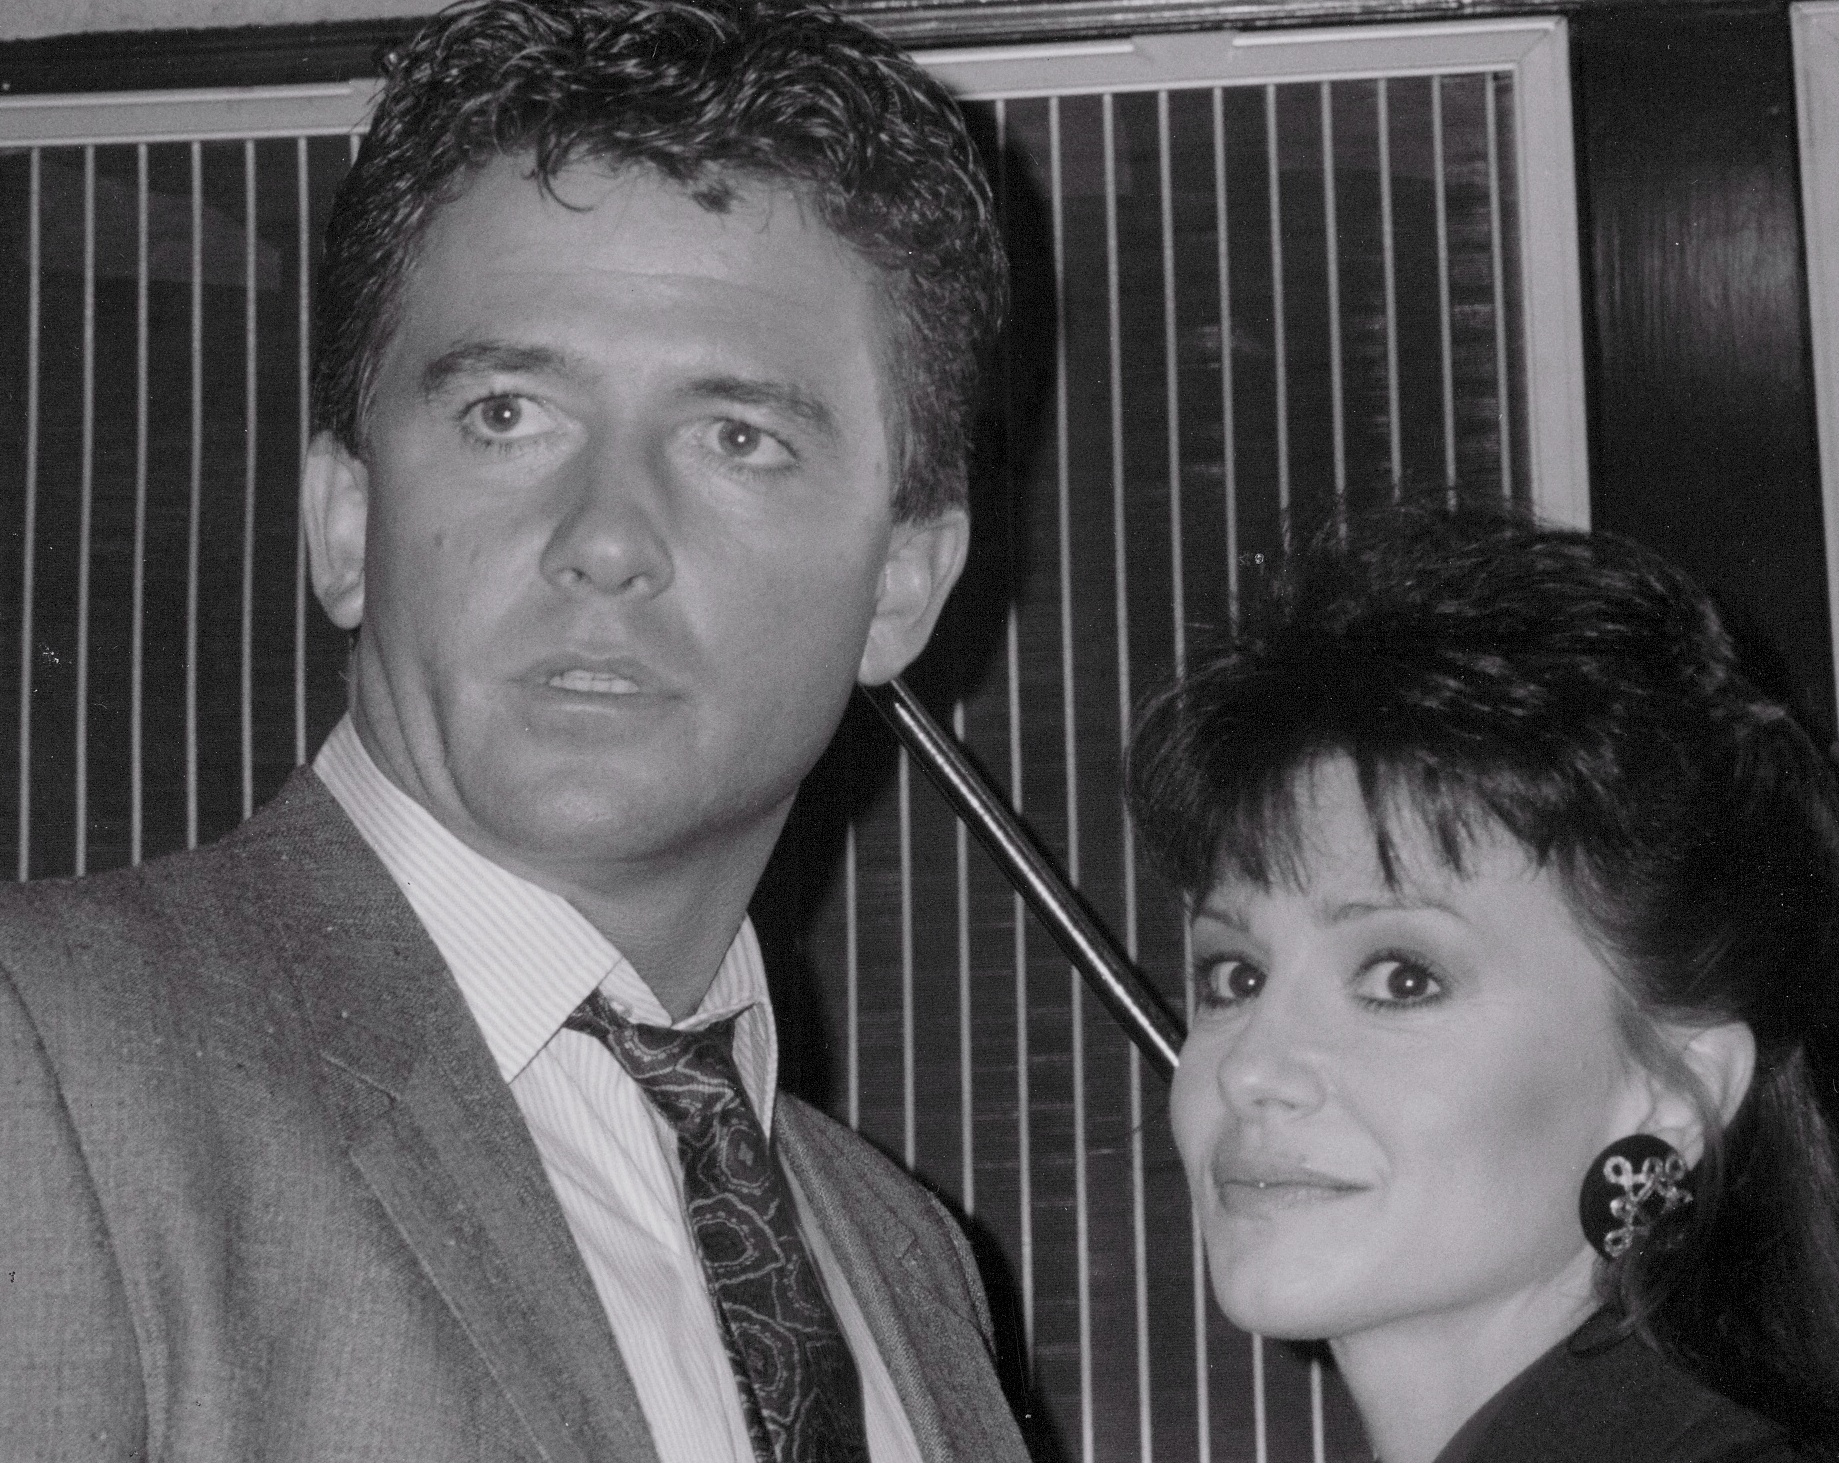 Dallas Margaret Michaels and Patrick Duffy